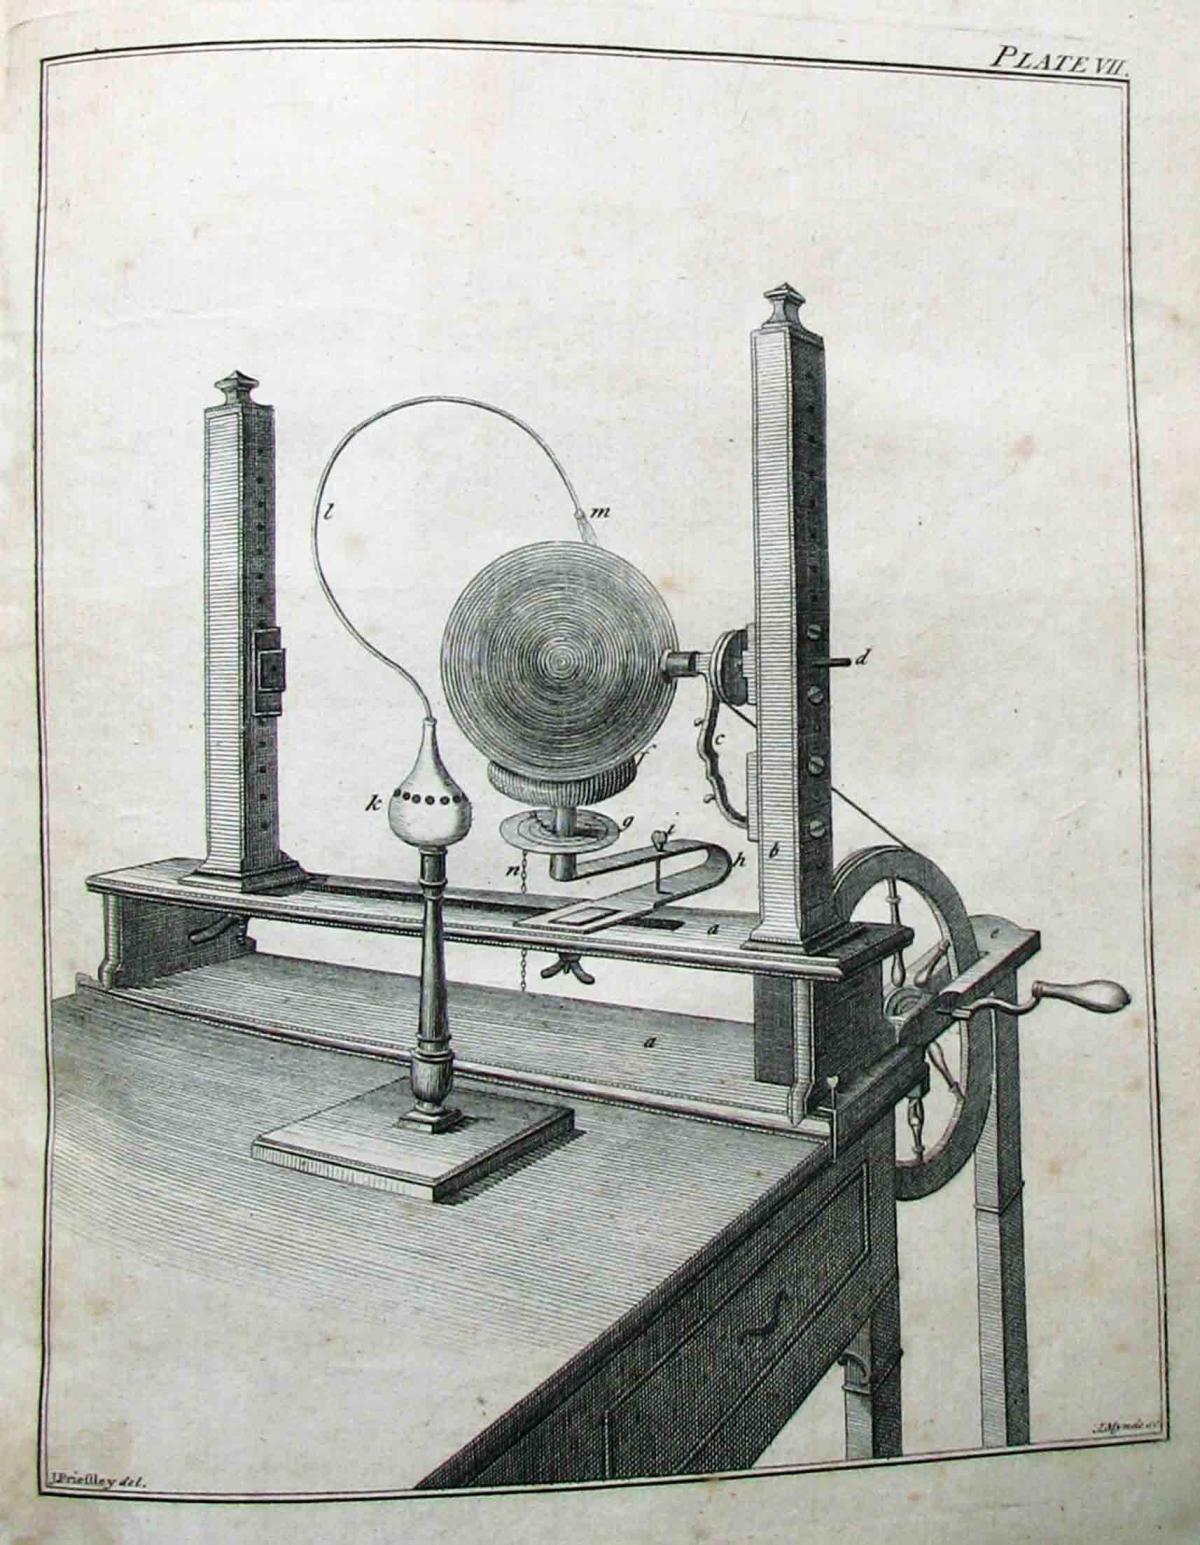 A drawing of an electrical machine designed by Joseph Priestley